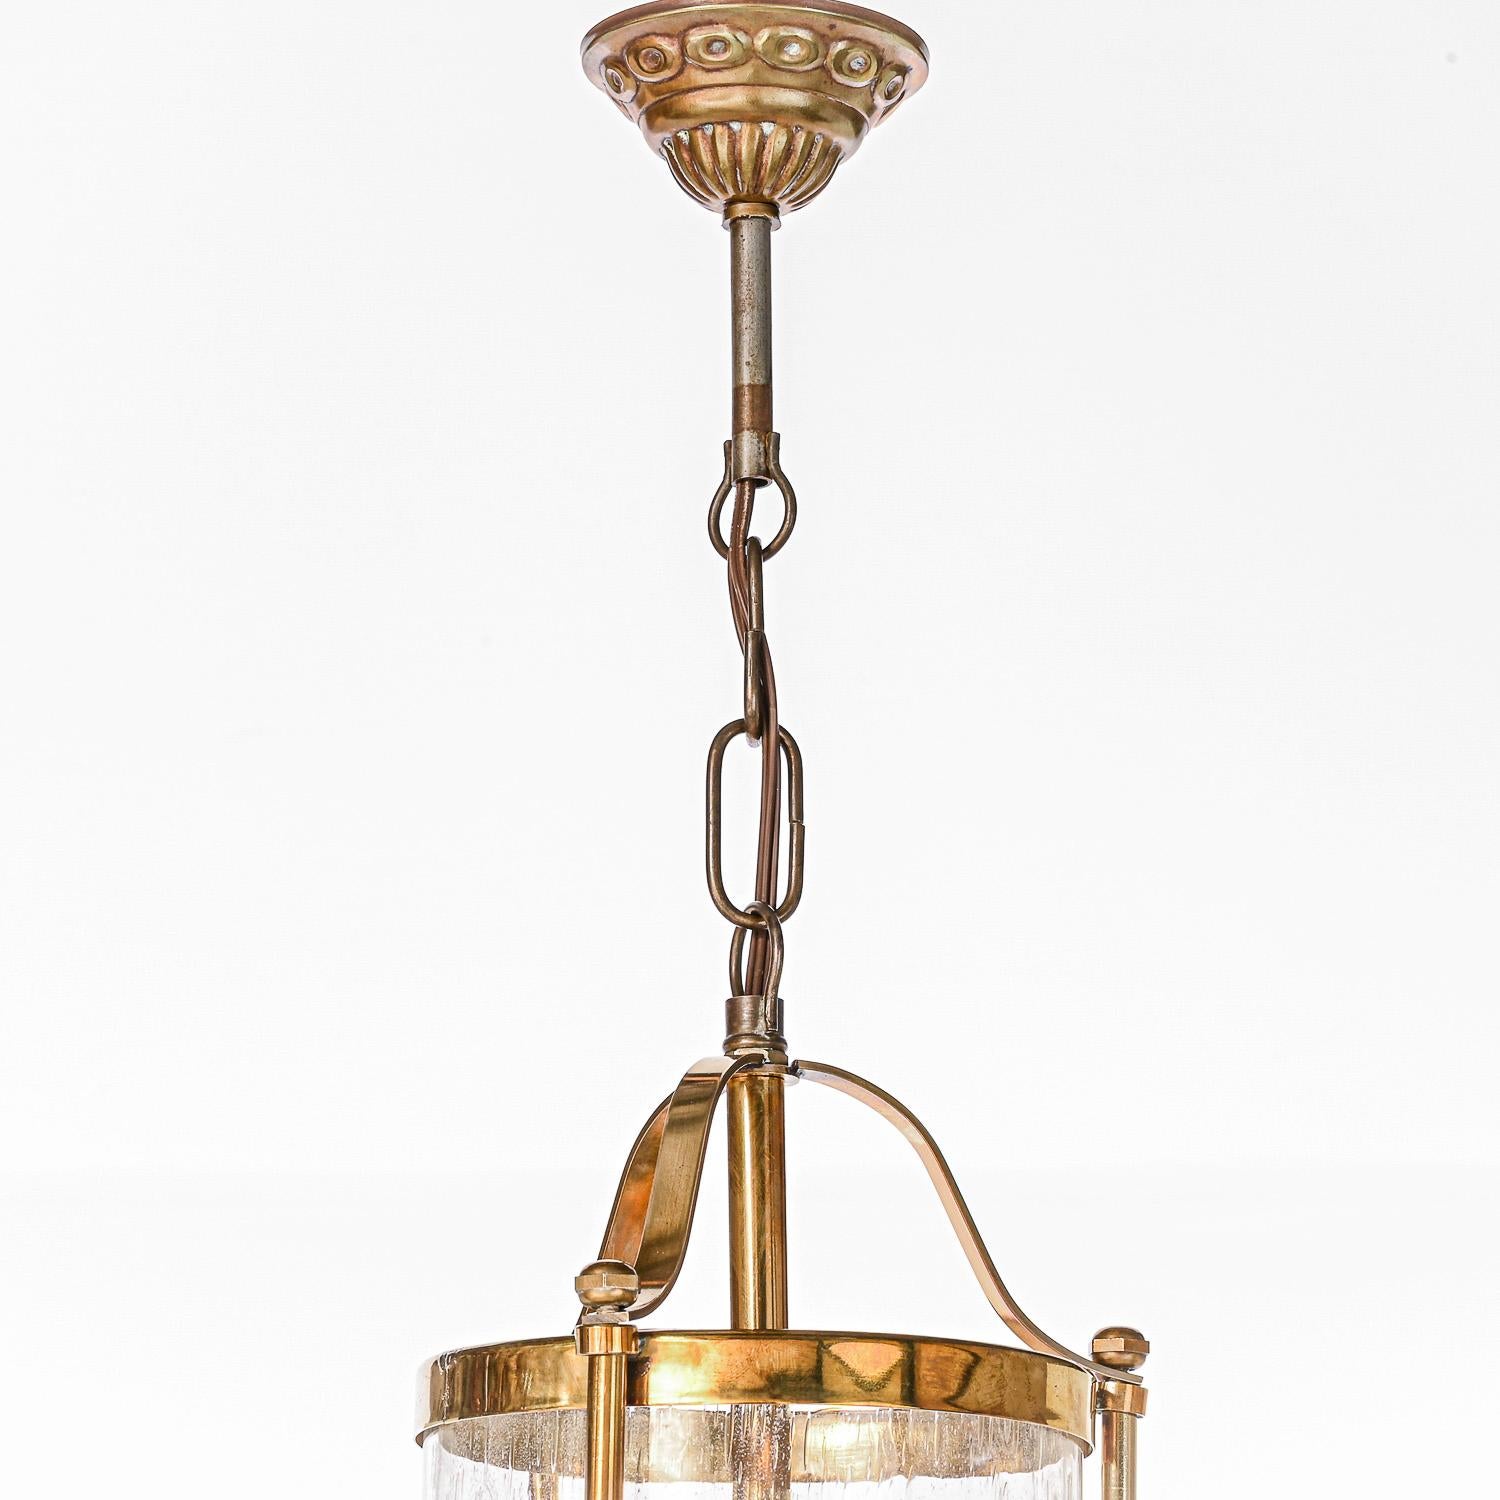 French Early 20th Century Glass & Brass Lantern For Sale